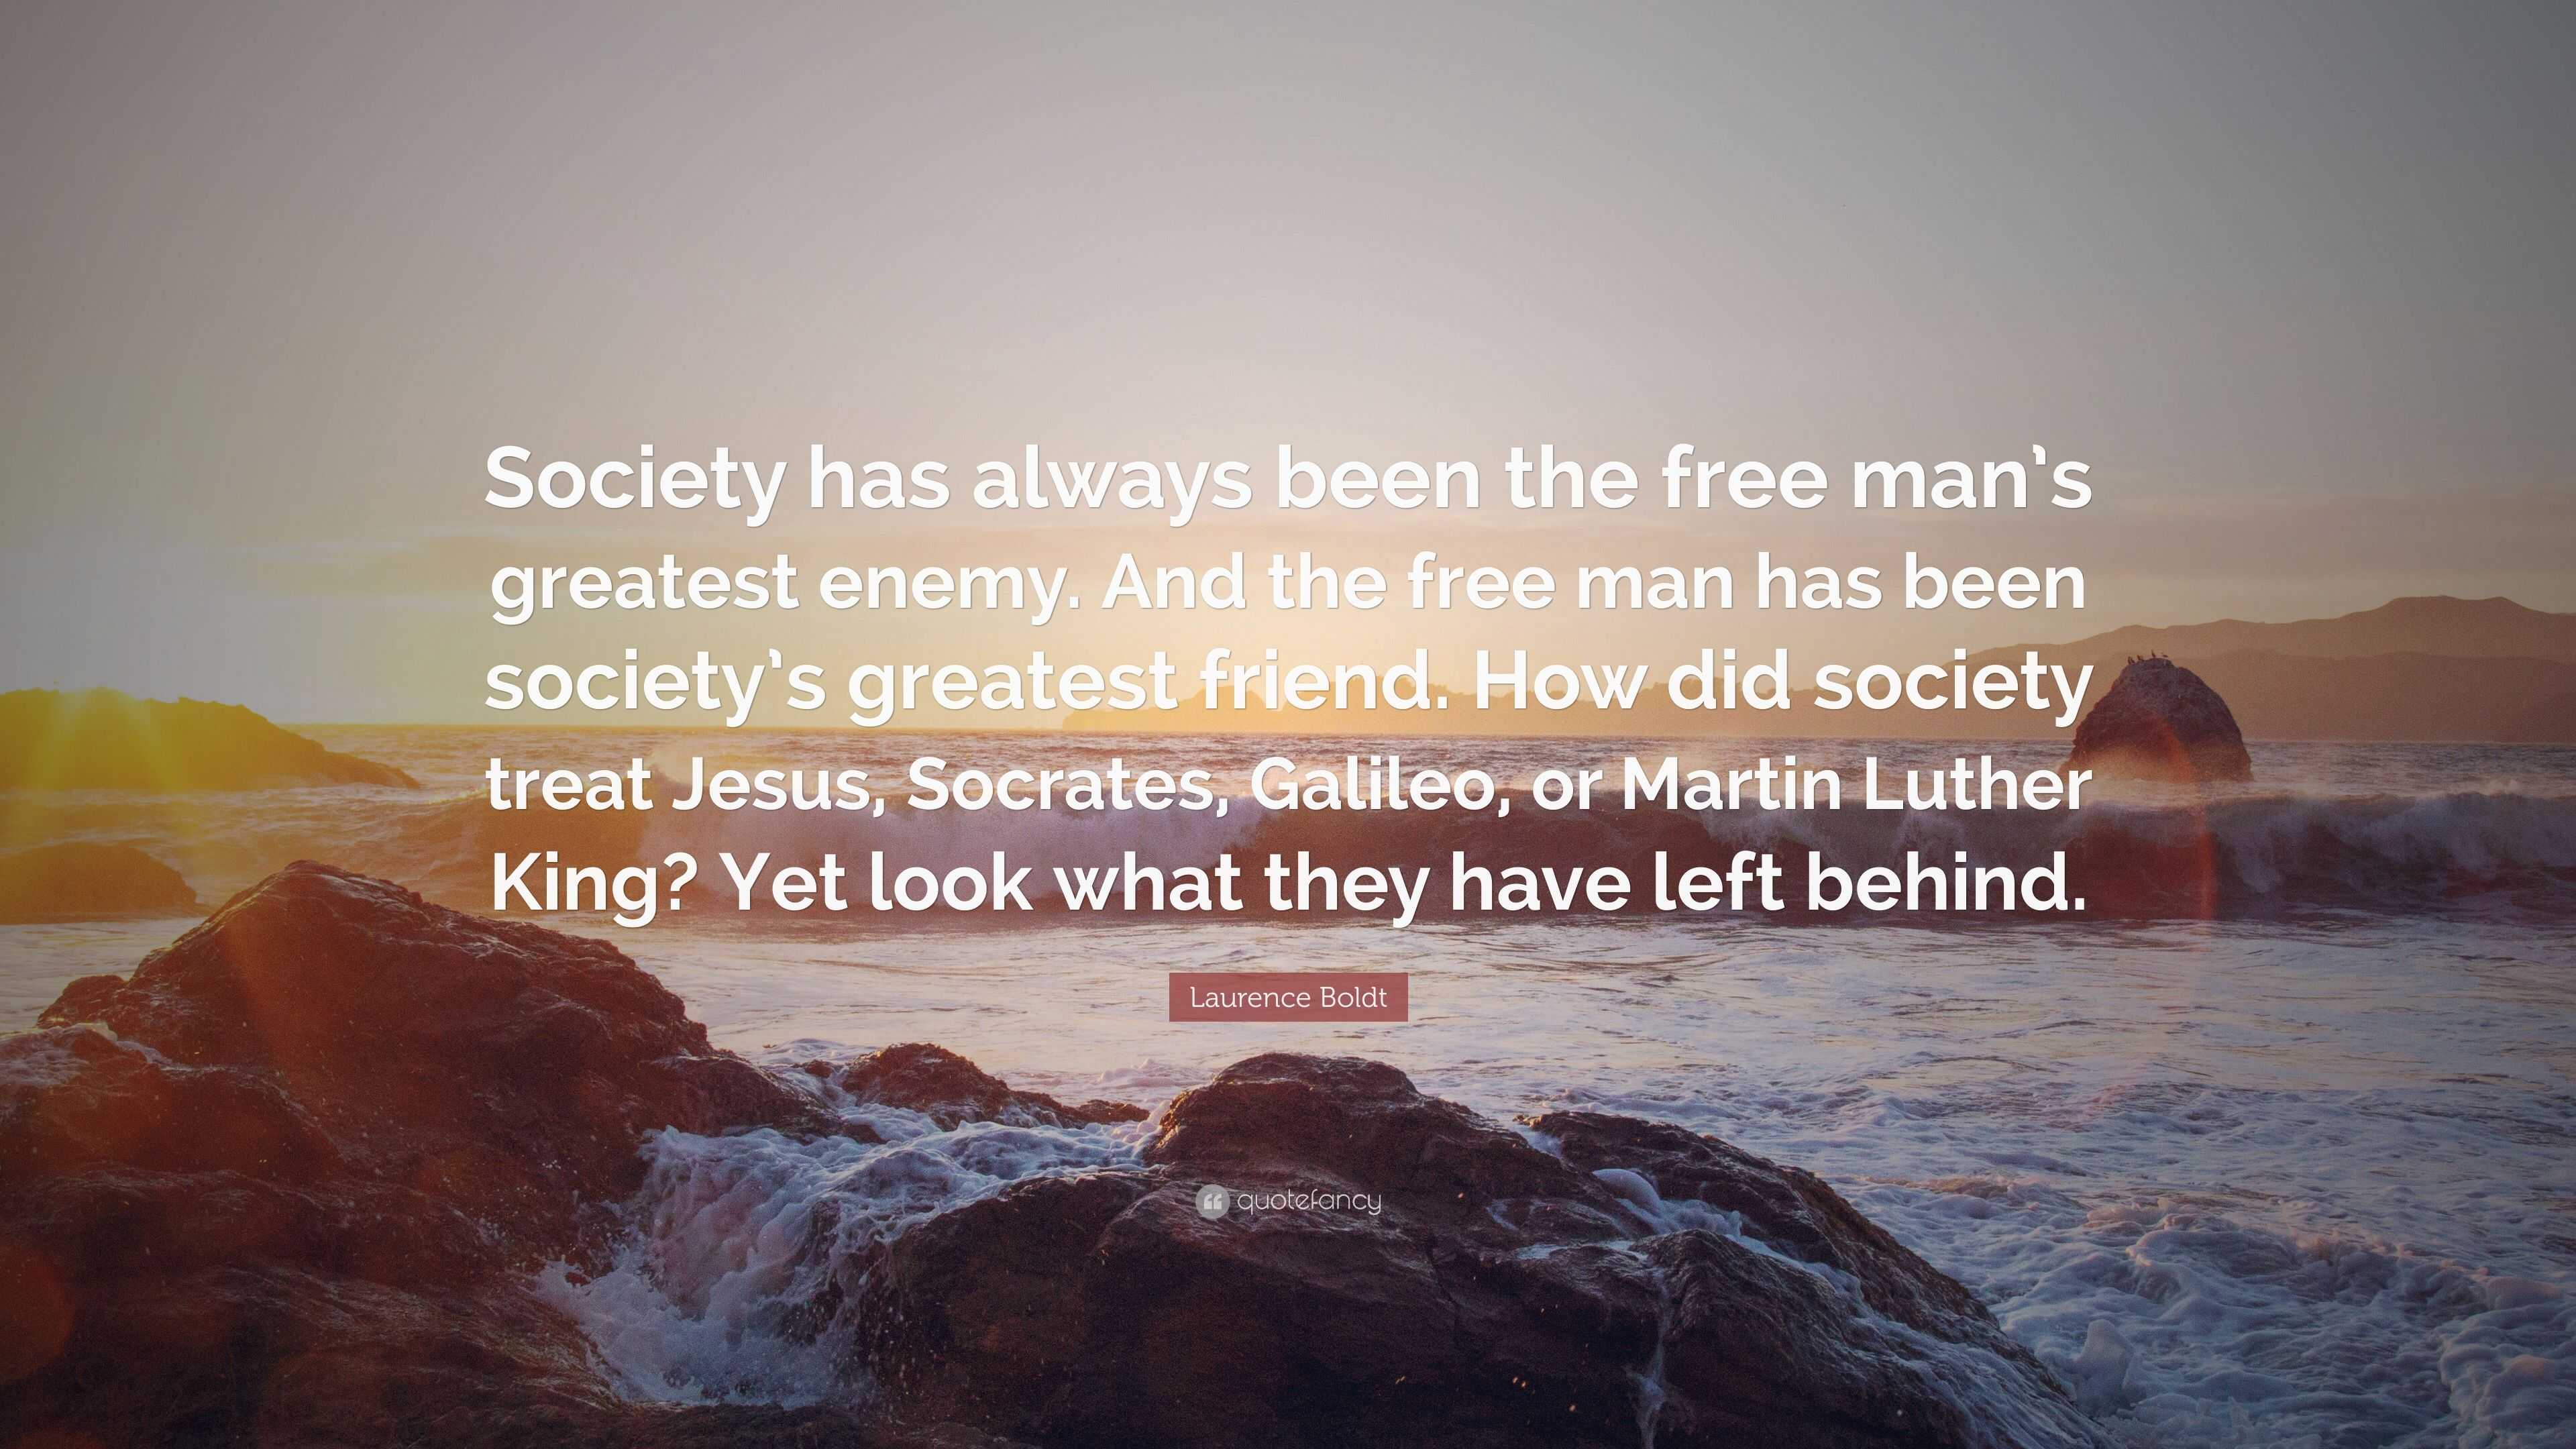 Laurence Boldt Quote: “Society has always been the free man’s greatest ...